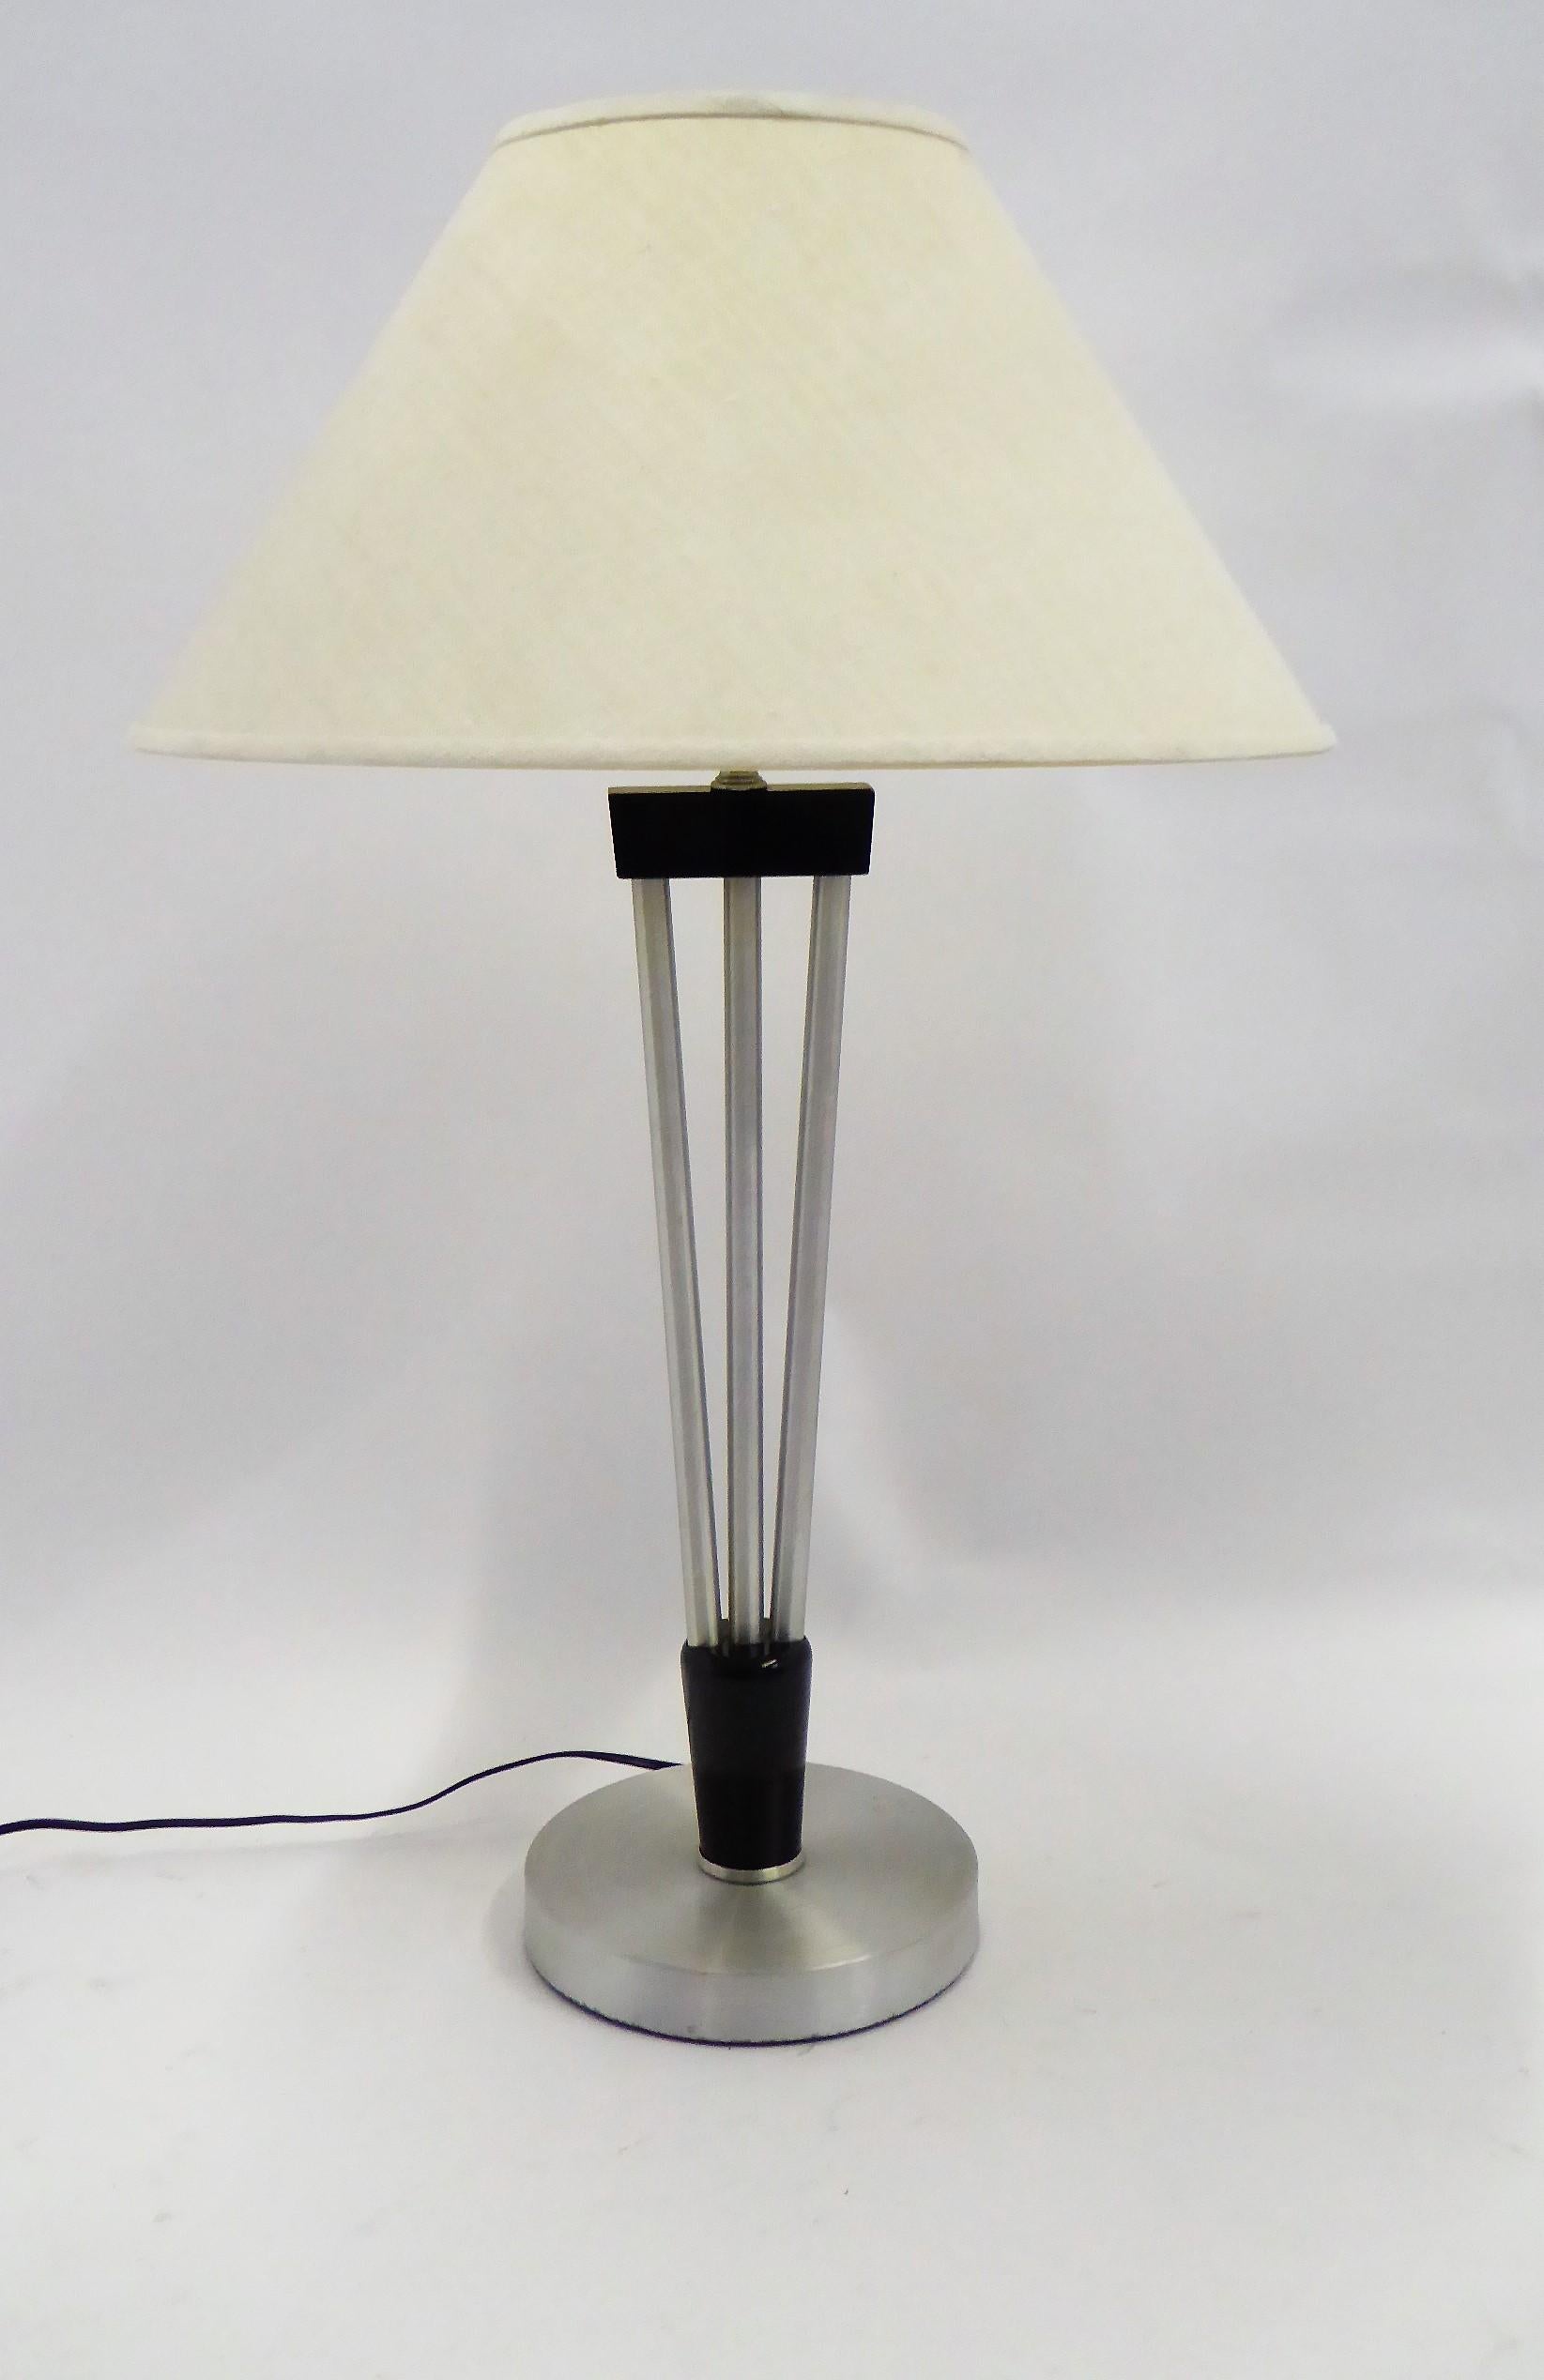 Wonderful late 1940s table lamp by Russel Wright. The socle base of circular spun aluminum topped by an ebonized carved wood base to three up climbing aluminum poles to an ebonized wood shoulder continuing to a neck socket holding the milk glass